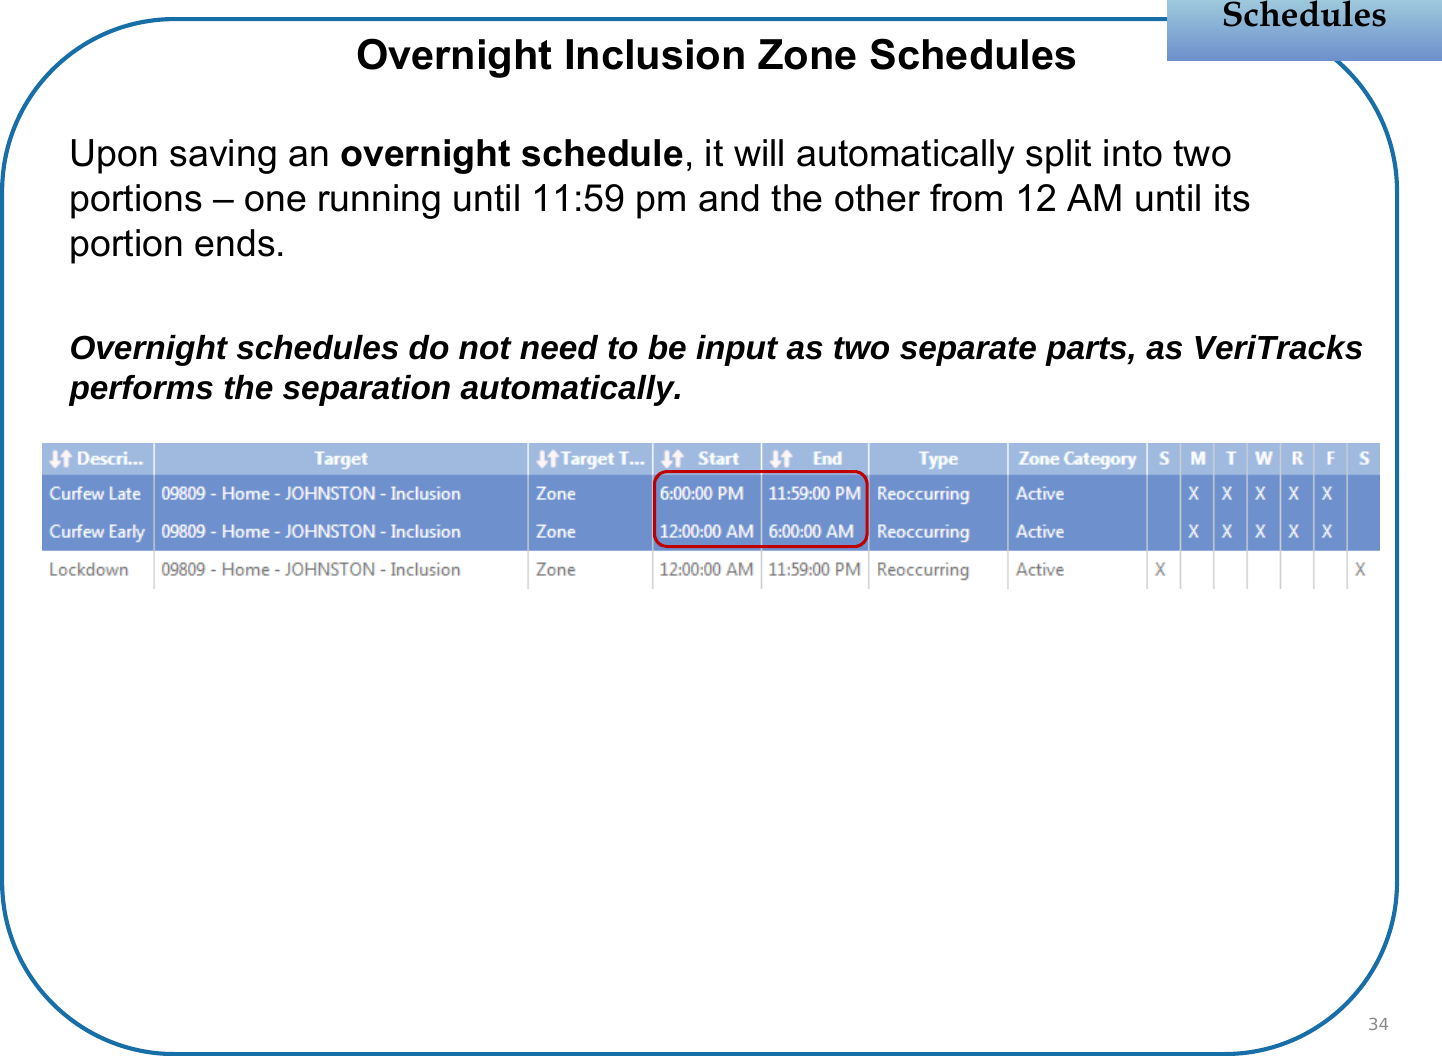 Overnight Inclusion Zone SchedulesUpon saving an overnight schedule, it will automatically split into two portions – one running until 11:59 pm and the other from 12 AM until its portion ends.Overnight schedules do not need to be input as two separate parts, as VeriTracks performs the separation automatically.SchedulesSchedules34